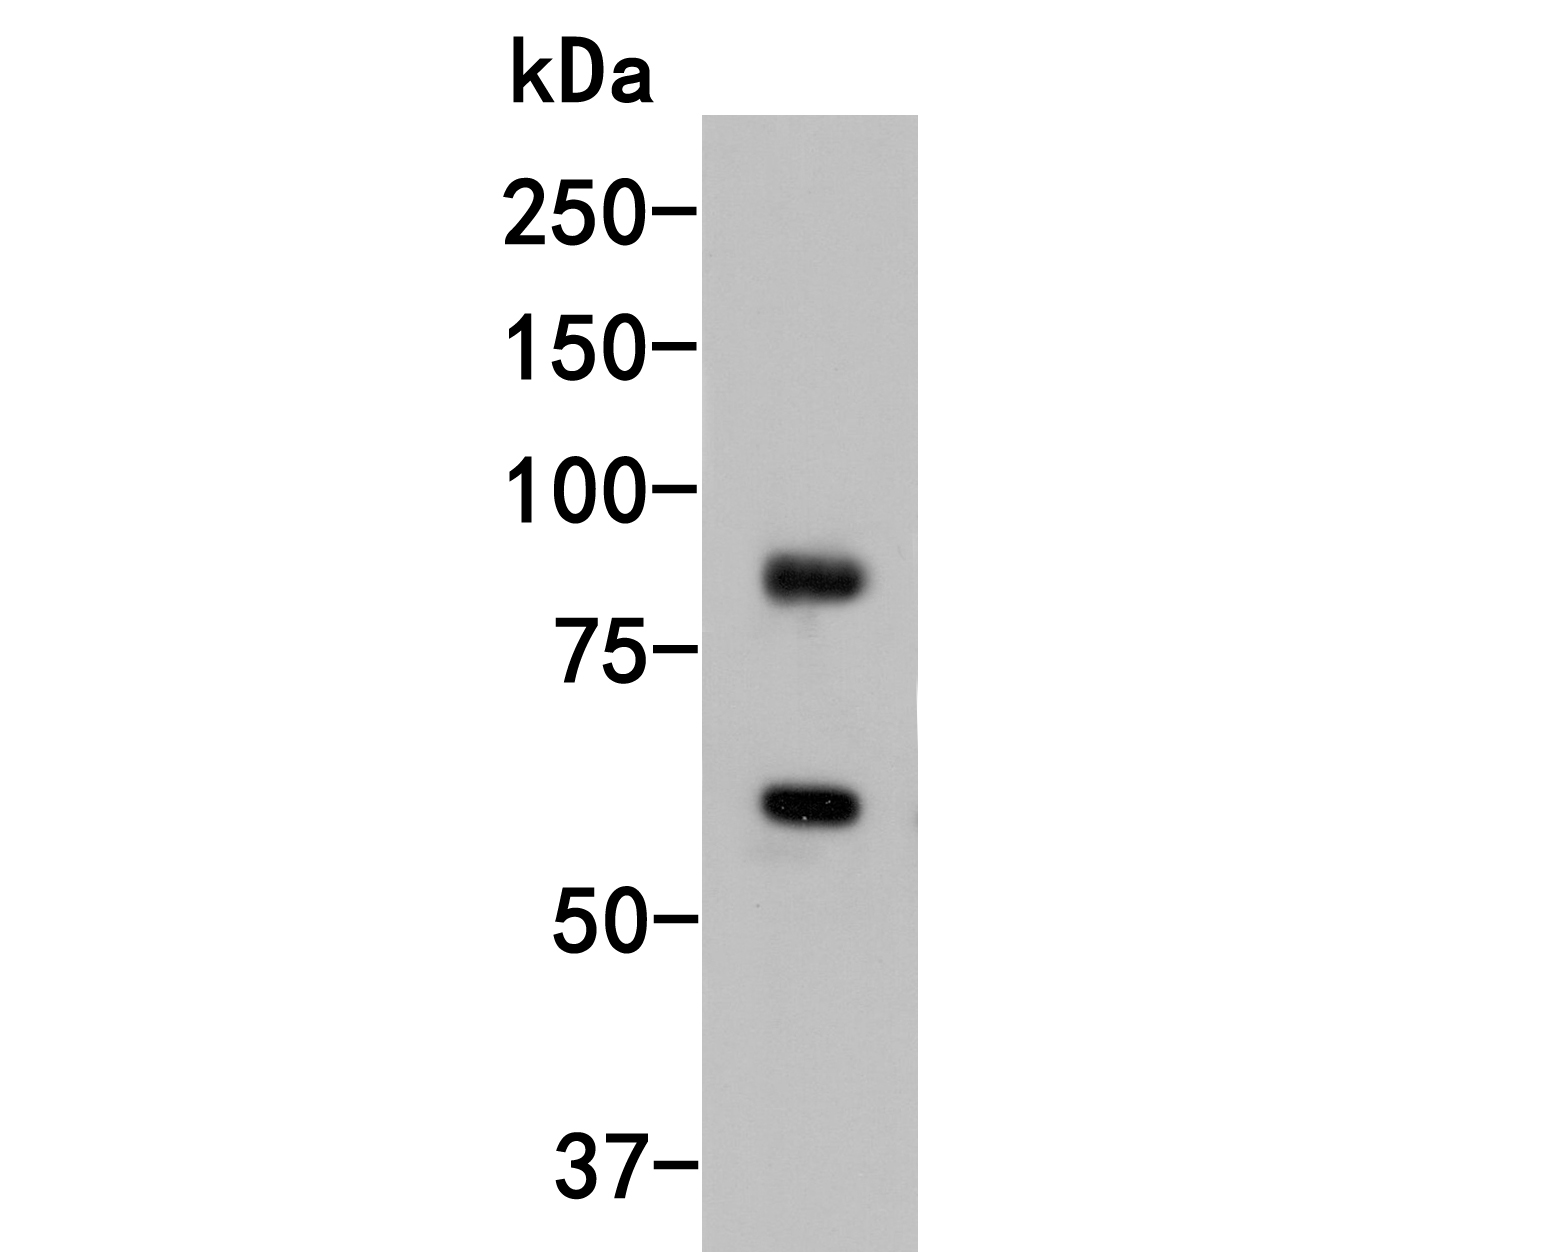 Western blot analysis of ICAM-1 on Raji cell lysates. Proteins were transferred to a PVDF membrane and blocked with 5% BSA in PBS for 1 hour at room temperature. The primary antibody (M1511-6, 1/500) was used in 5% BSA at room temperature for 2 hours. Goat Anti-Mouse IgG - HRP Secondary Antibody (HA1006) at 1:5,000 dilution was used for 1 hour at room temperature.